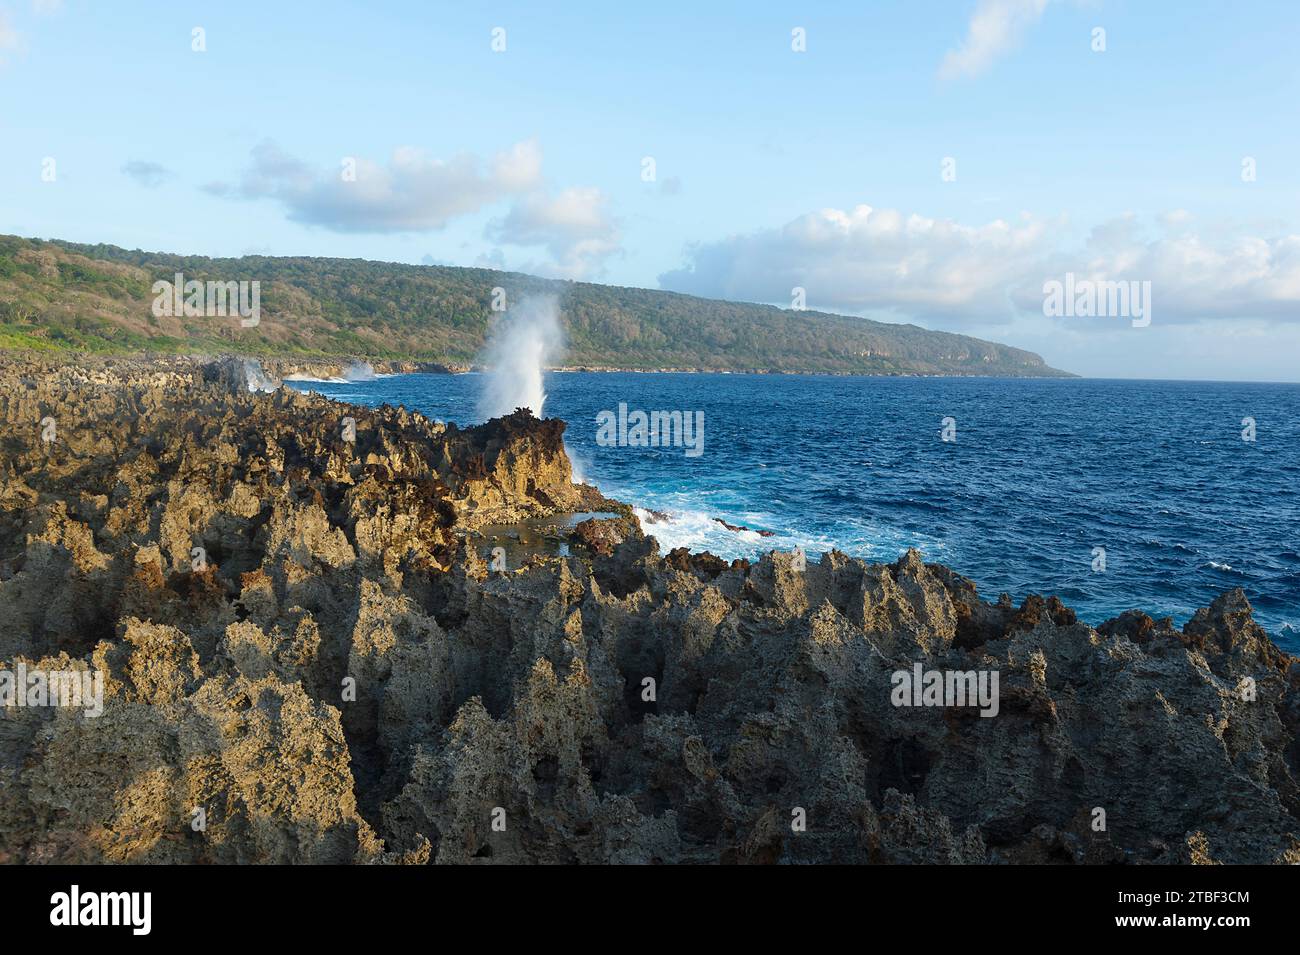 Scenic view of the Blowholes, a population tourist attraction on Christmas Island, Australia Stock Photo